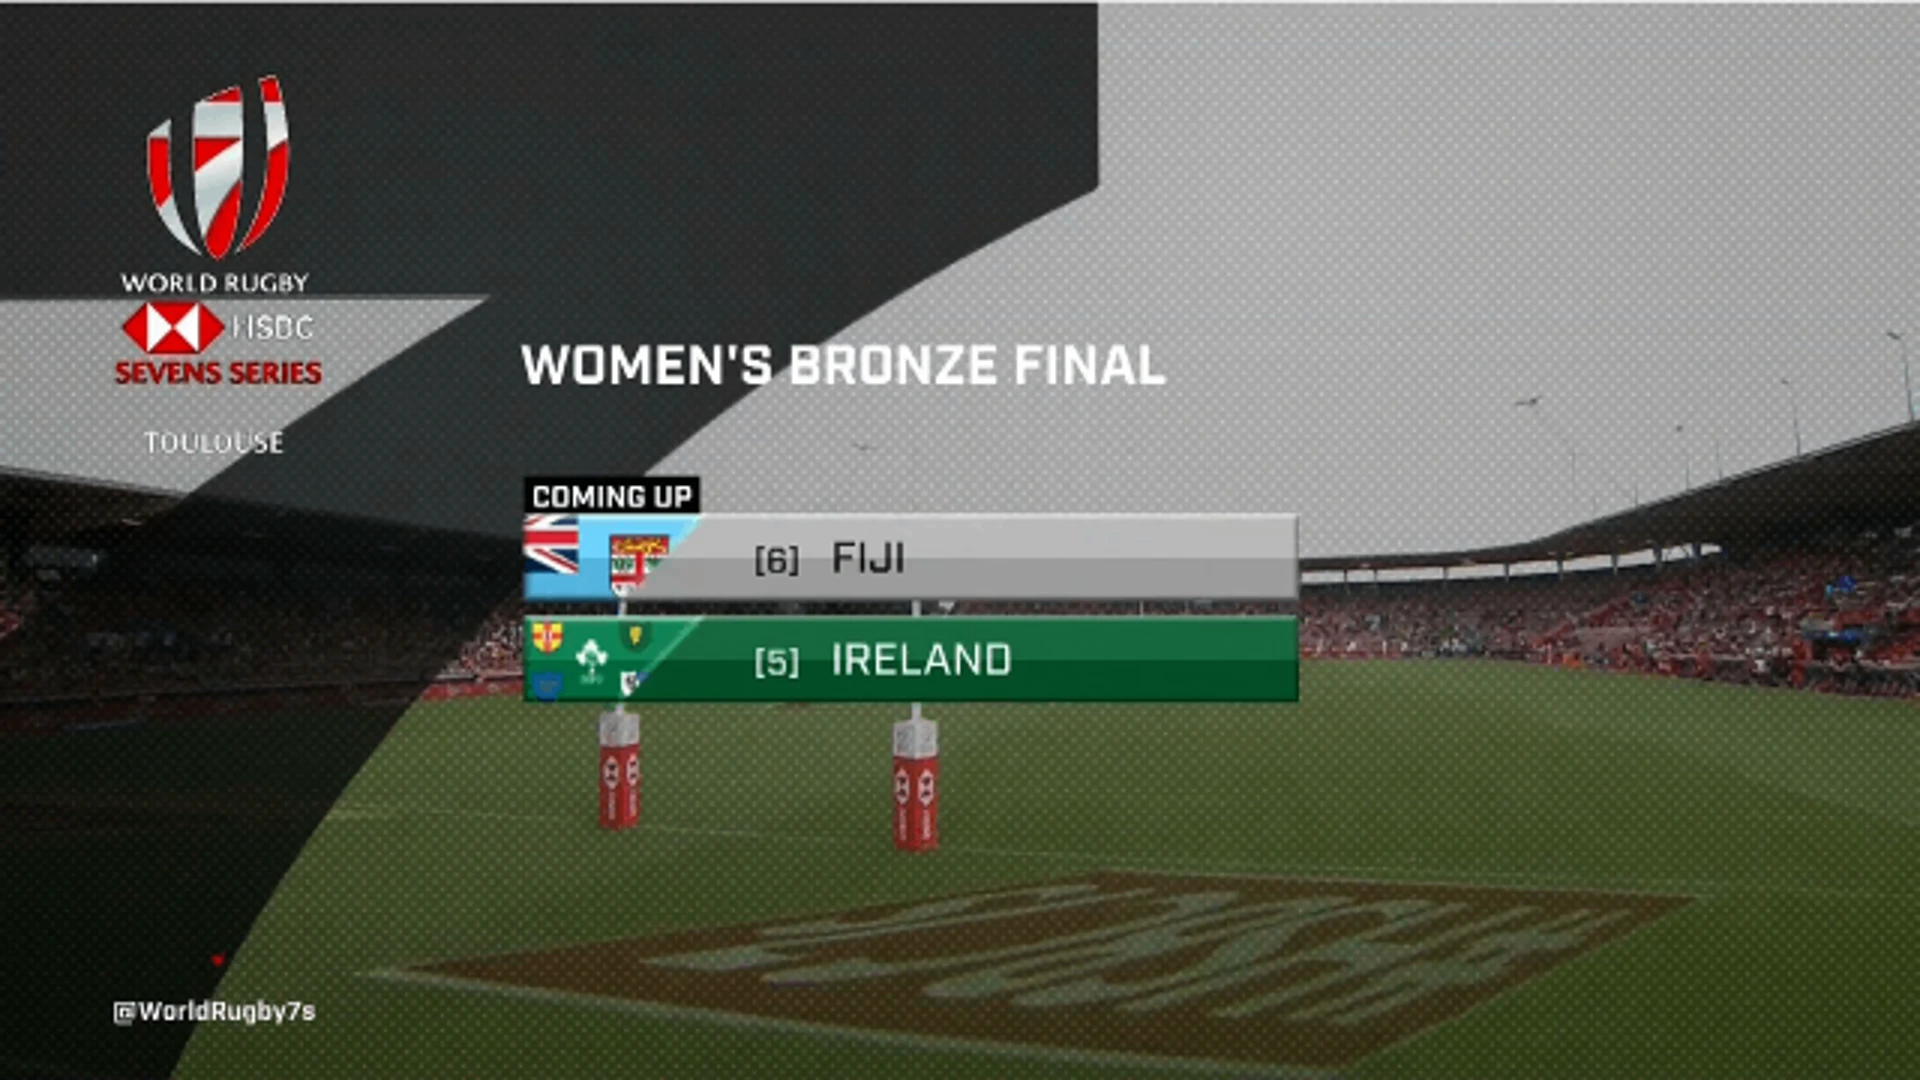 World Rugby HSBC Women's Sevens Series Toulouse | Fiji v Ireland | 3rd P/O | Highlights